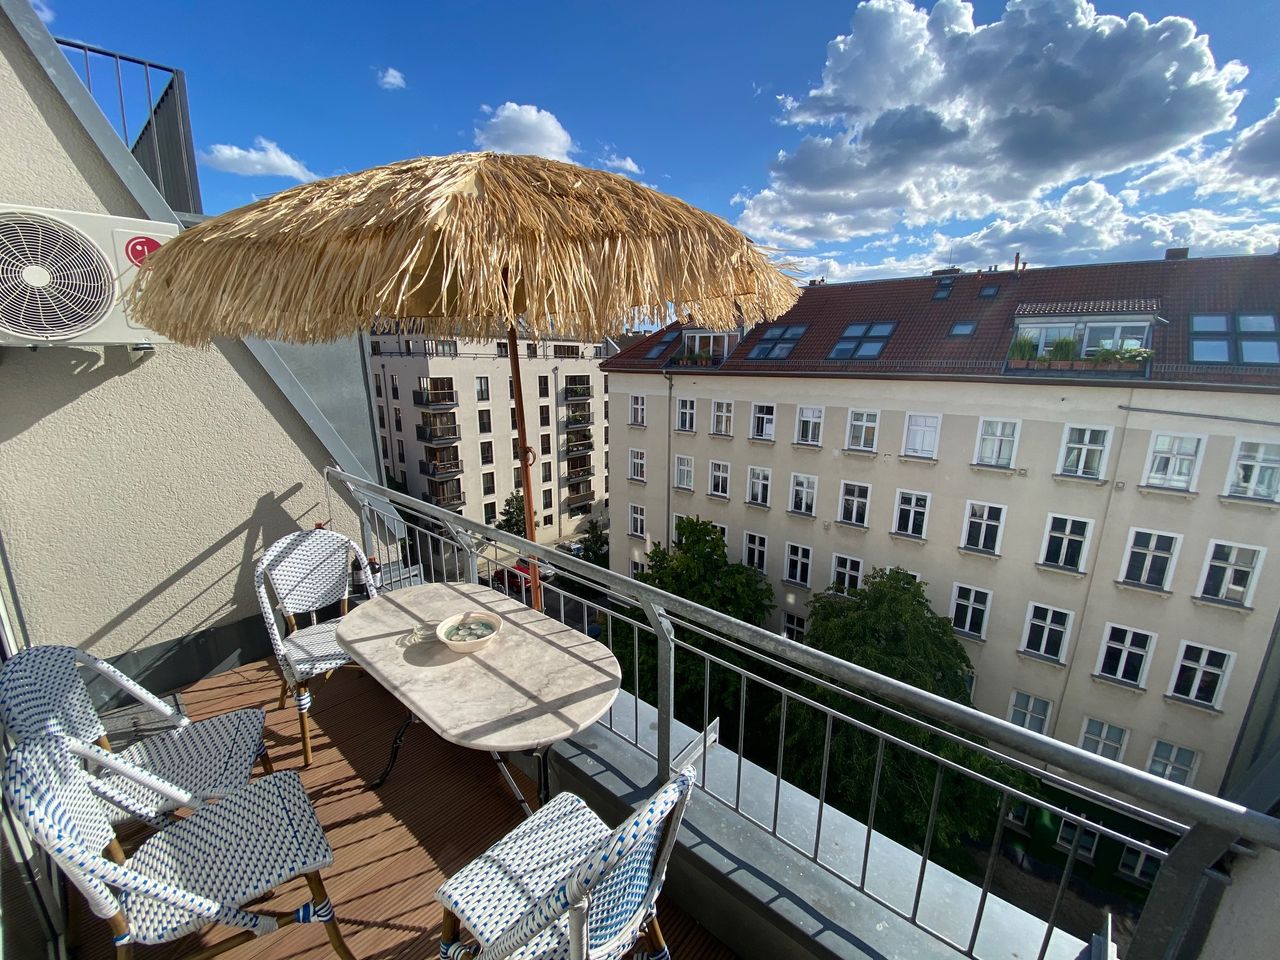 Parking free / 3 room top floor apartment in Berlin-Mitte, incl. underground car park with elevator to the top floor, terrace, WiFi,